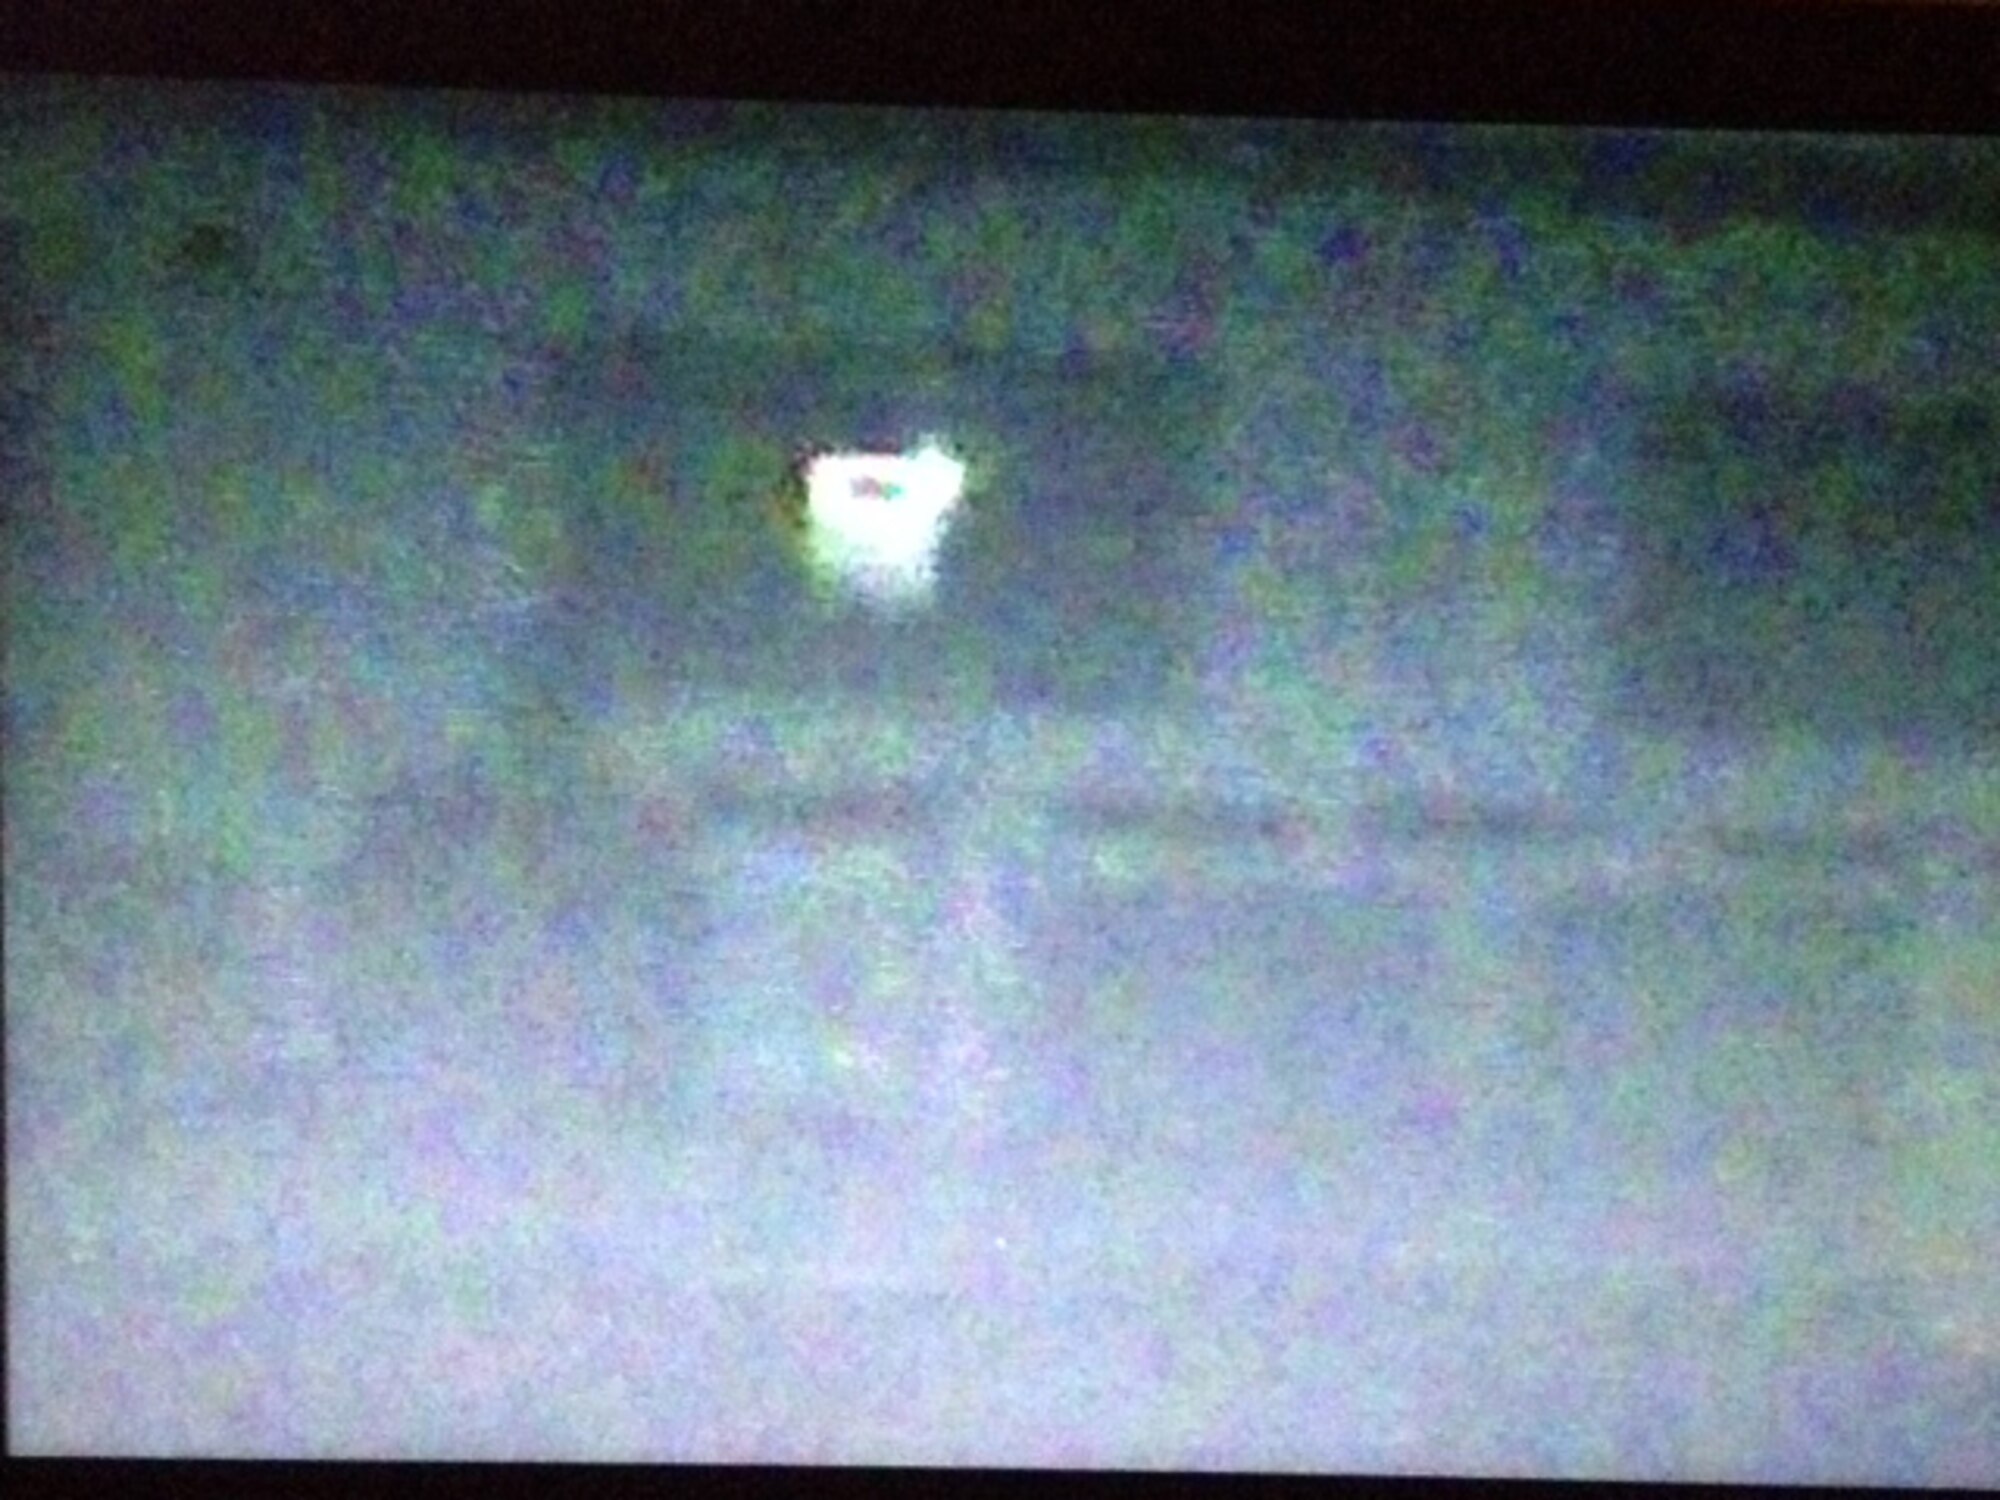 A camera captures what appears to be a shadowy figure (left side) sitting in one of several chairs lined up against a wall in a building on March Air Reserve Base Wednesday, Aug. 13, 2014. The image was captured during a nighttime paranormal investigation at the 96-year-old base. (Courtesy photo/Joe Mora)